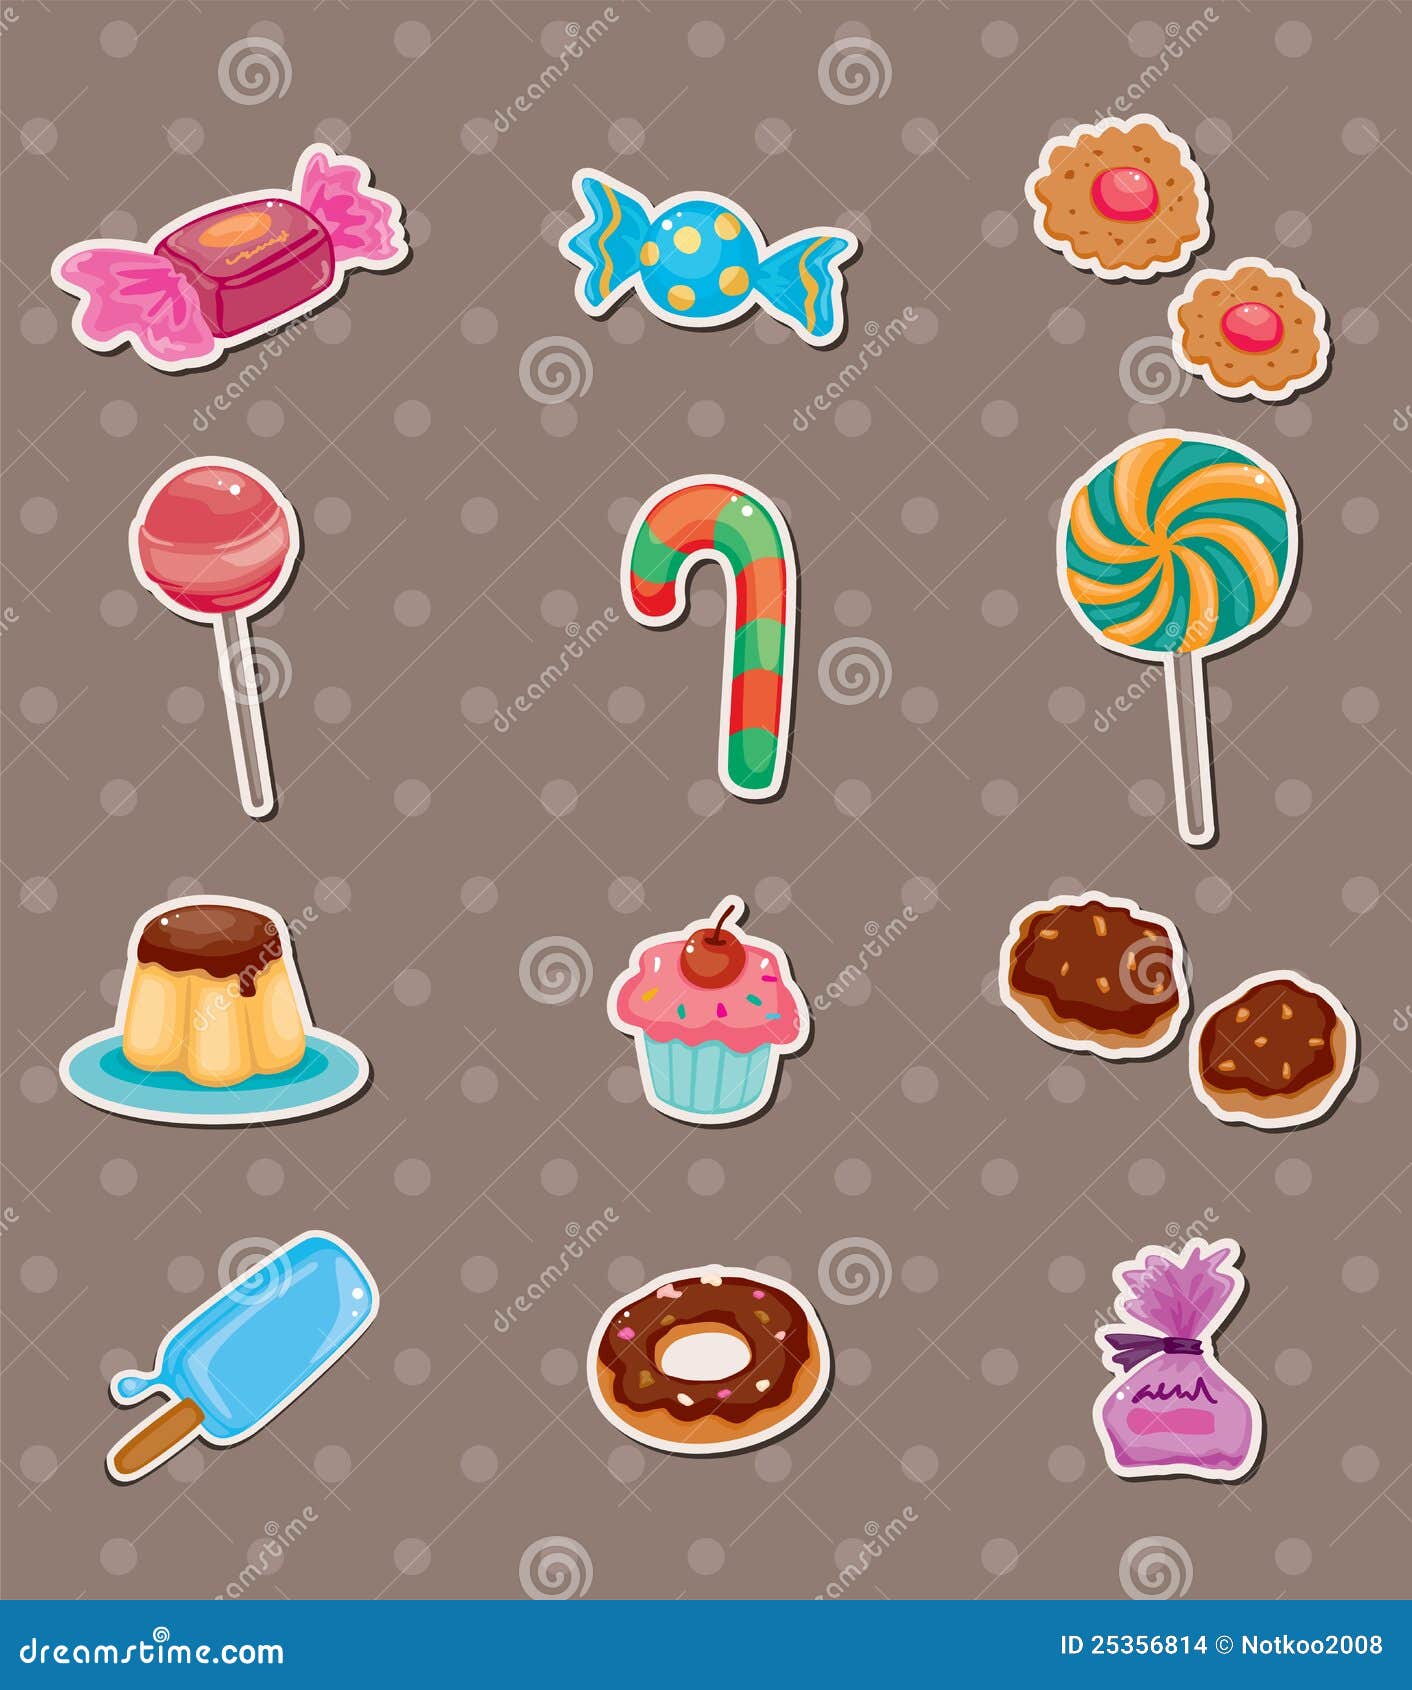 Candy stickers Vectors & Illustrations for Free Download